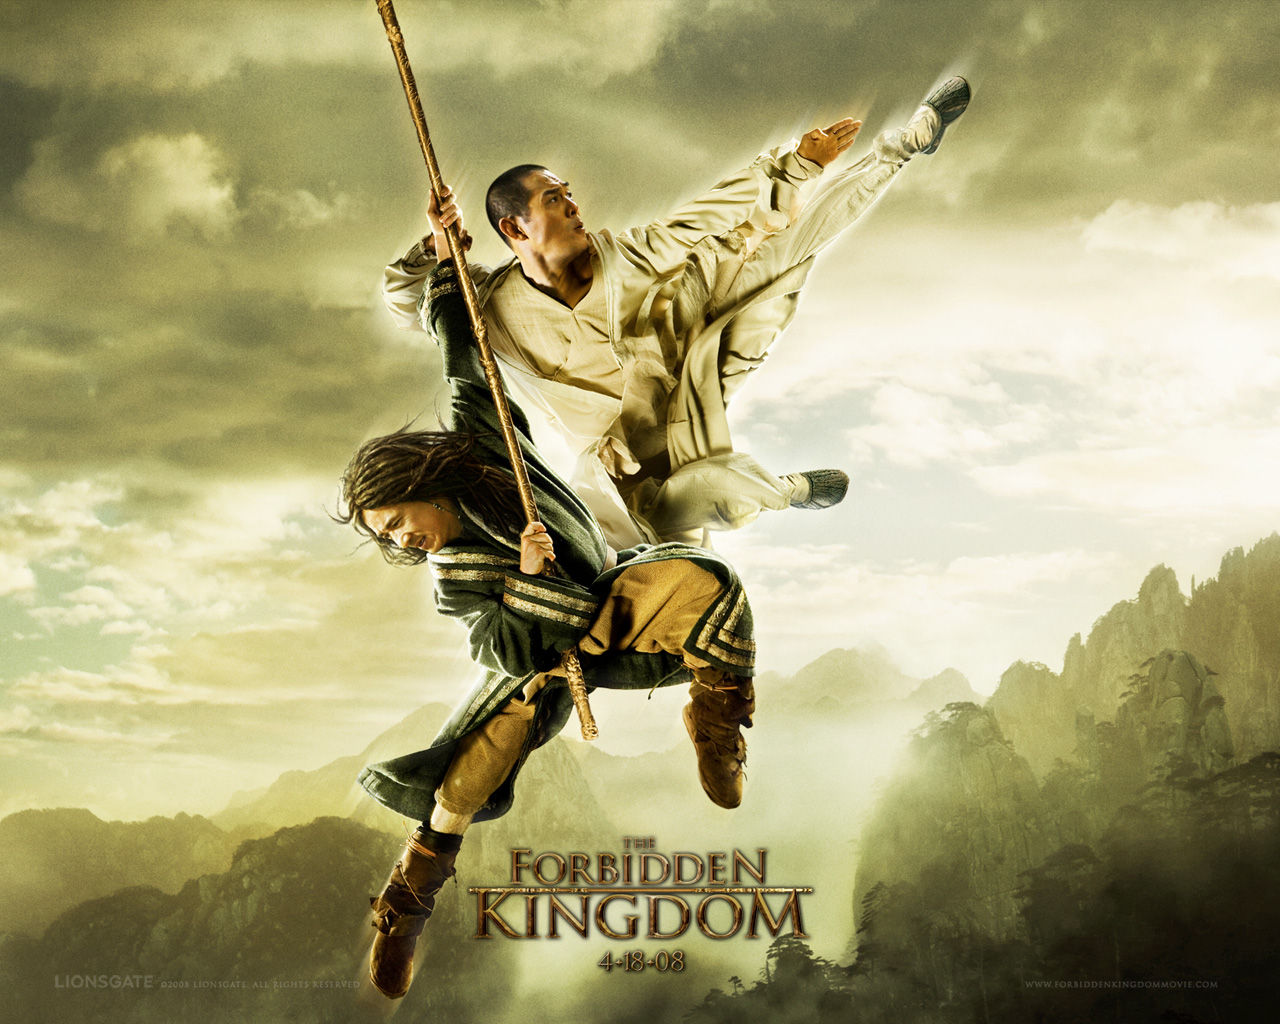 The Forbidden Kingdom Starring Jet Li Jackie Chan And Collin Chou Images, Photos, Reviews